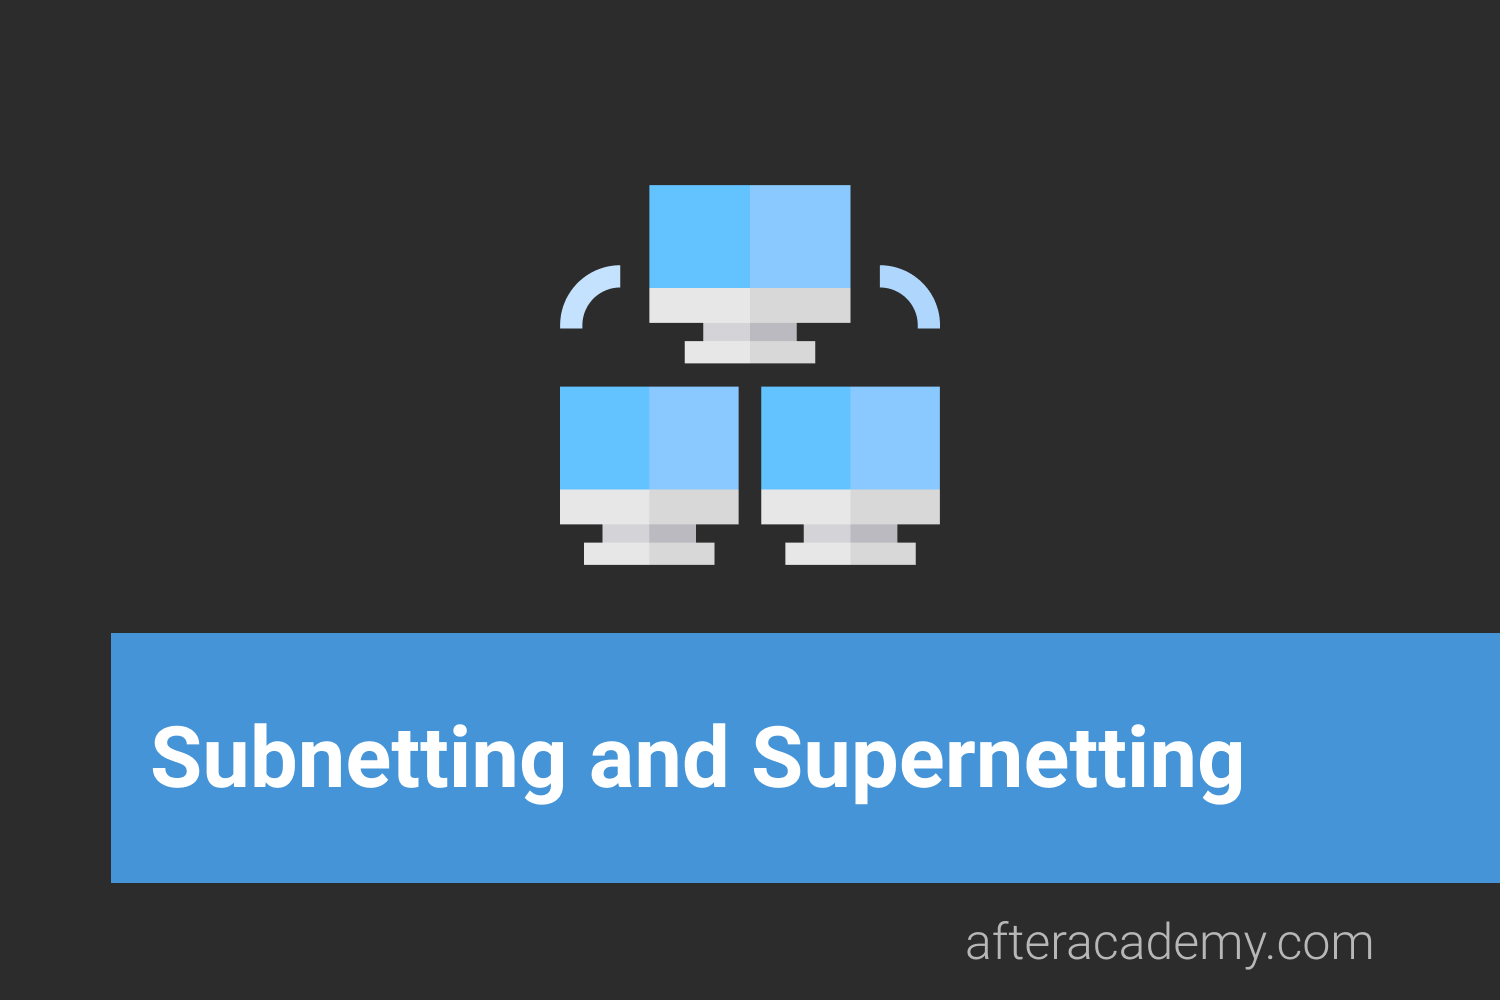 What is the concept of Subnetting and Supernetting?